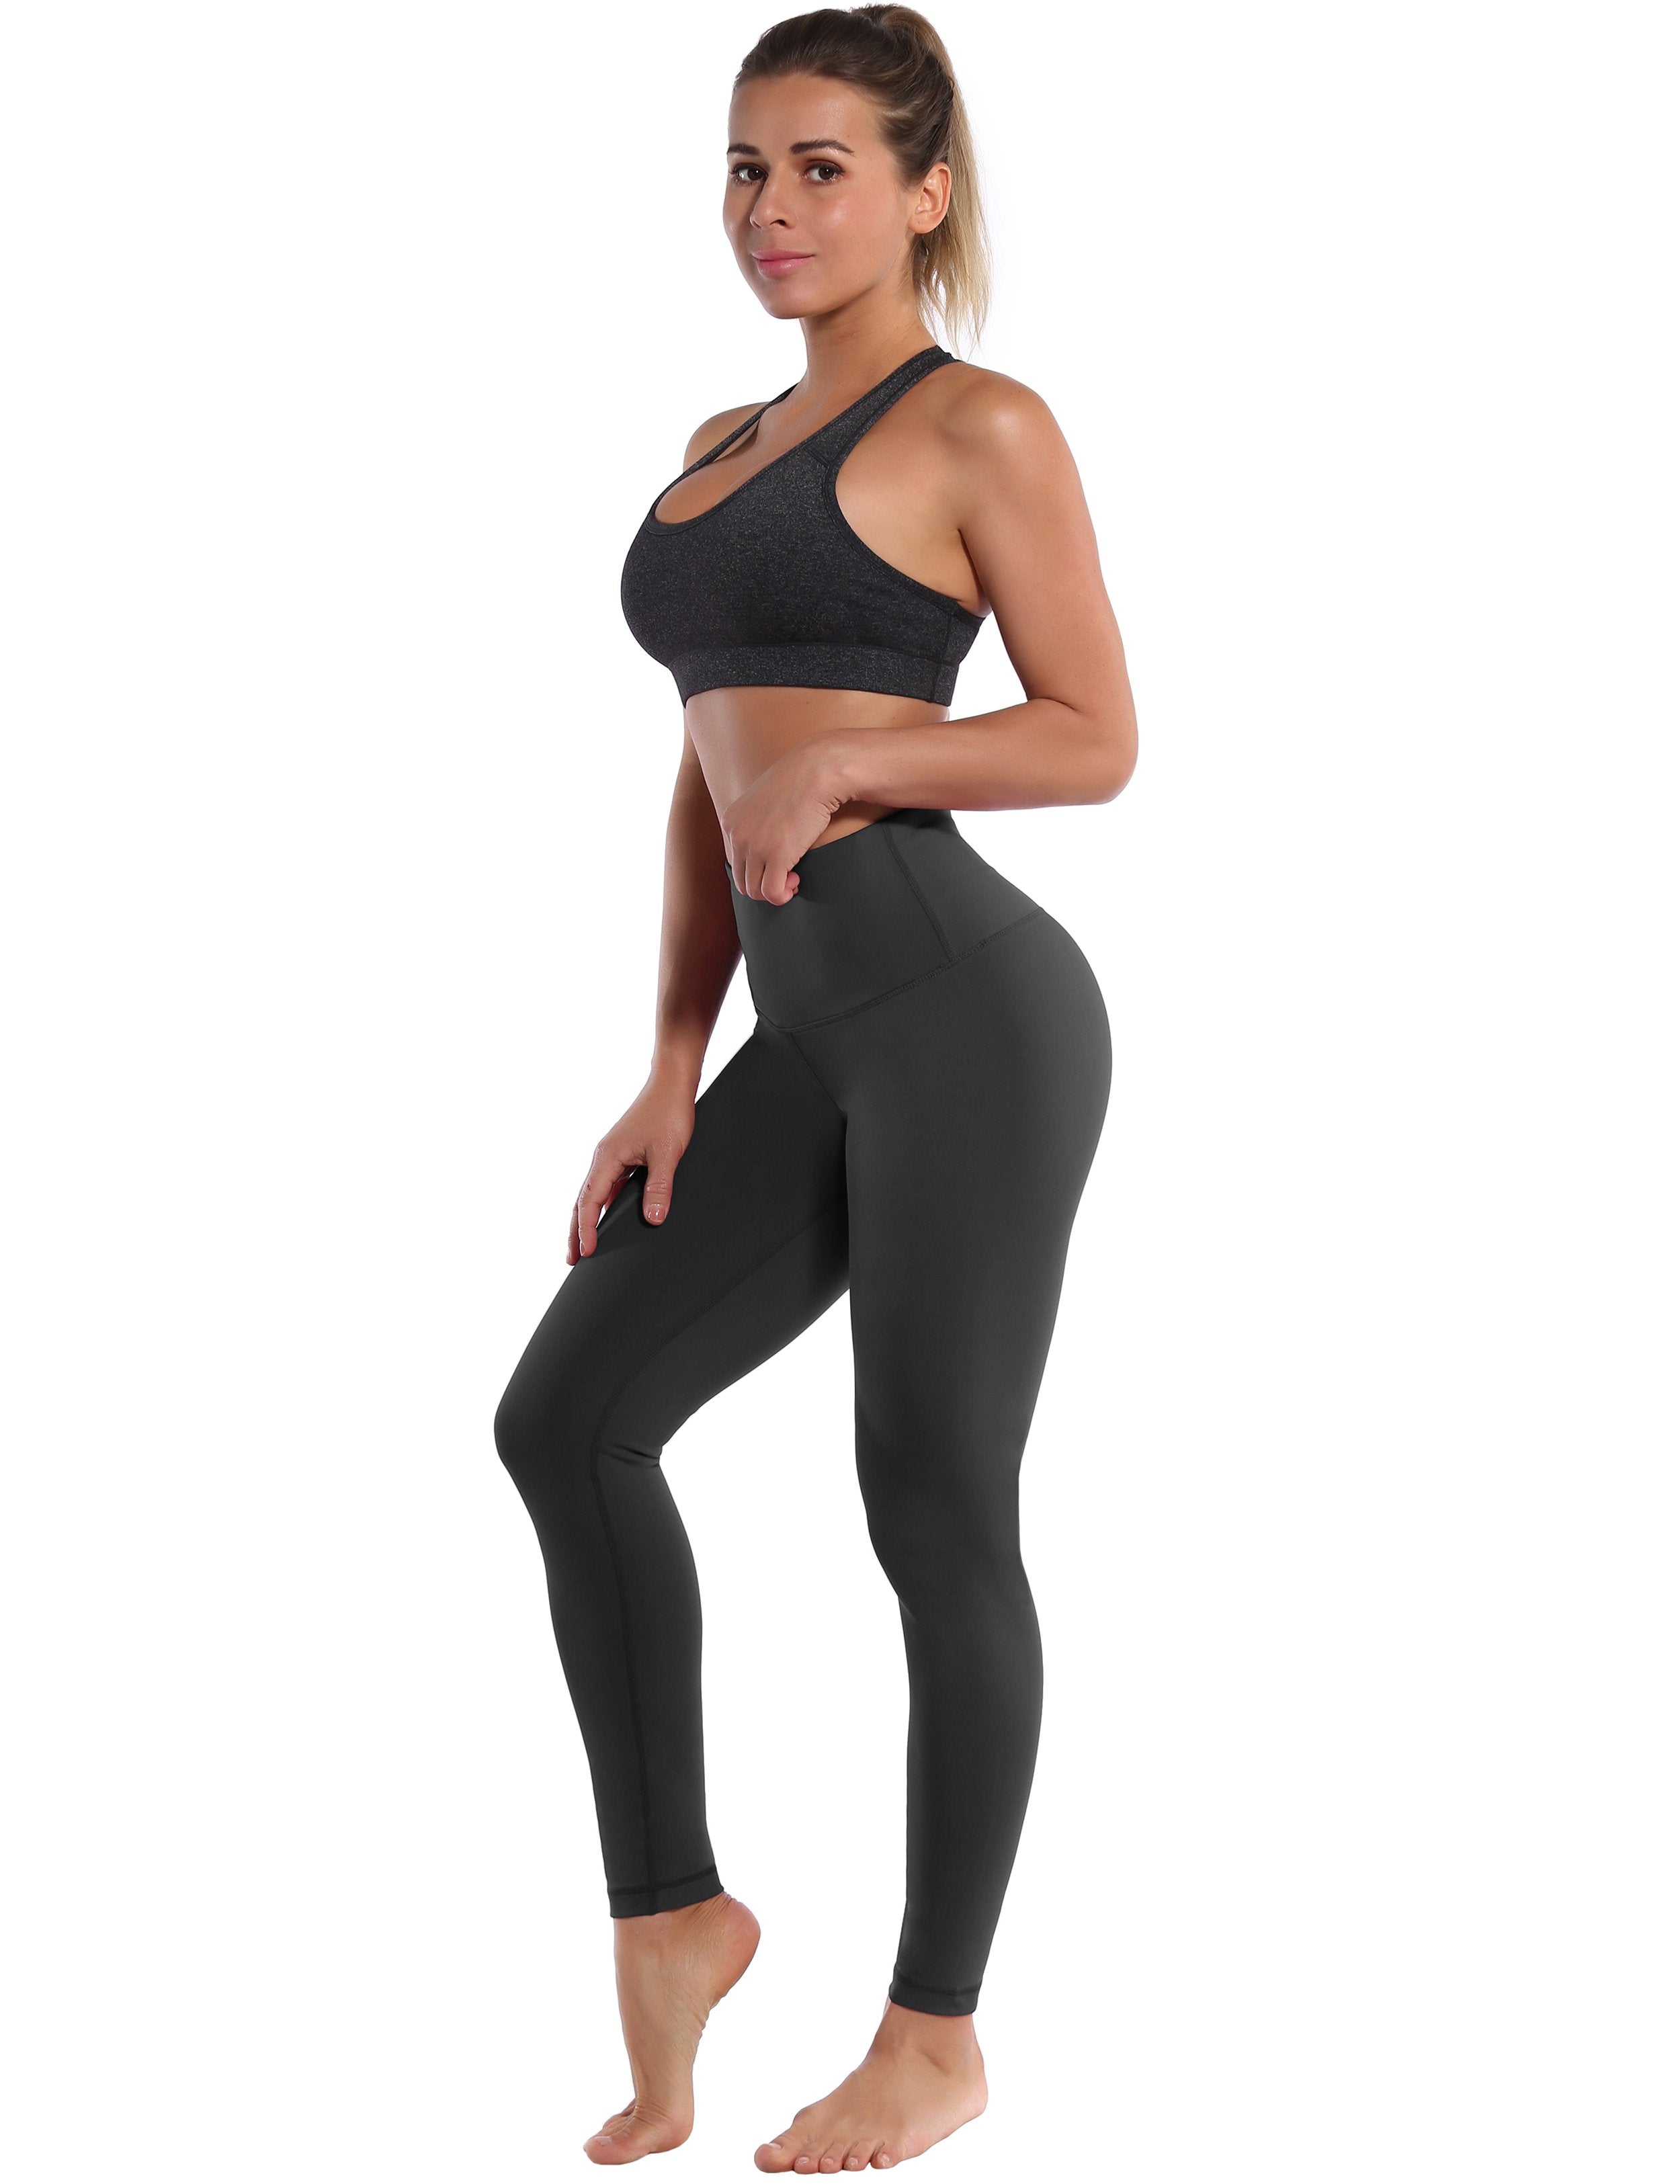 High Waist Golf Pants shadowcharcoal 75%Nylon/25%Spandex Fabric doesn't attract lint easily 4-way stretch No see-through Moisture-wicking Tummy control Inner pocket Four lengths